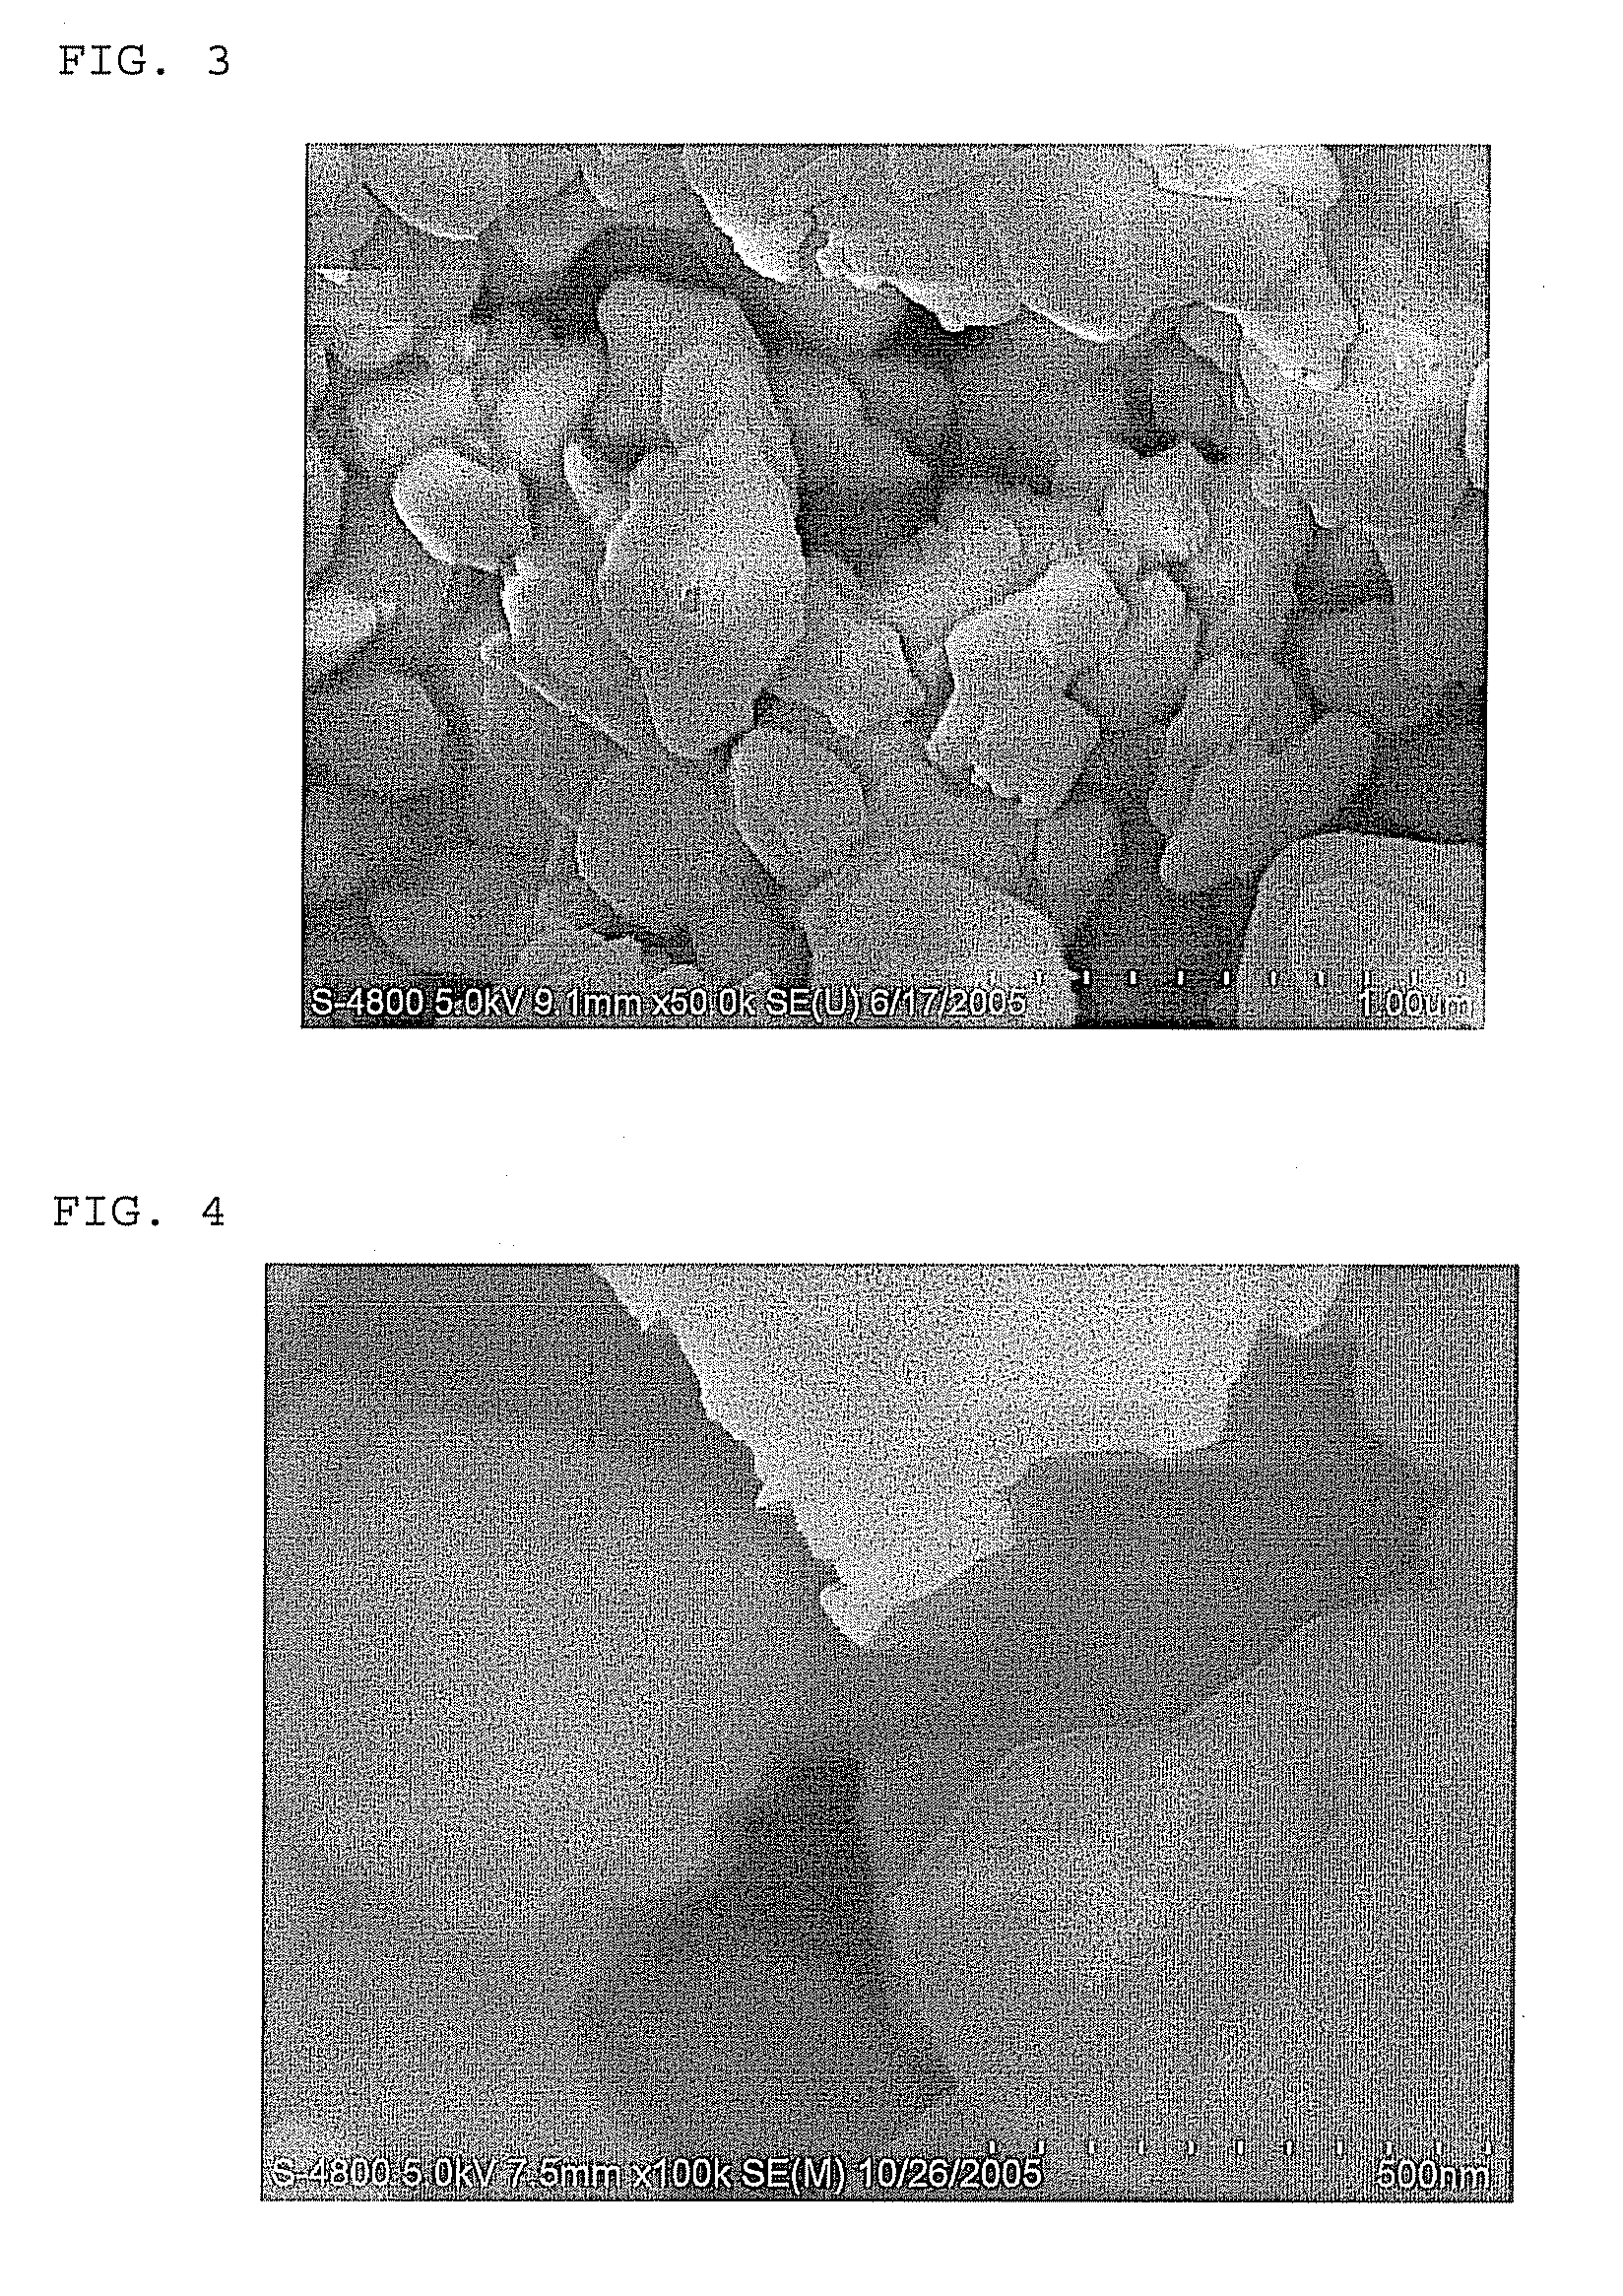 Organic/inorganic composite porous membrane and electrochemical device using the same